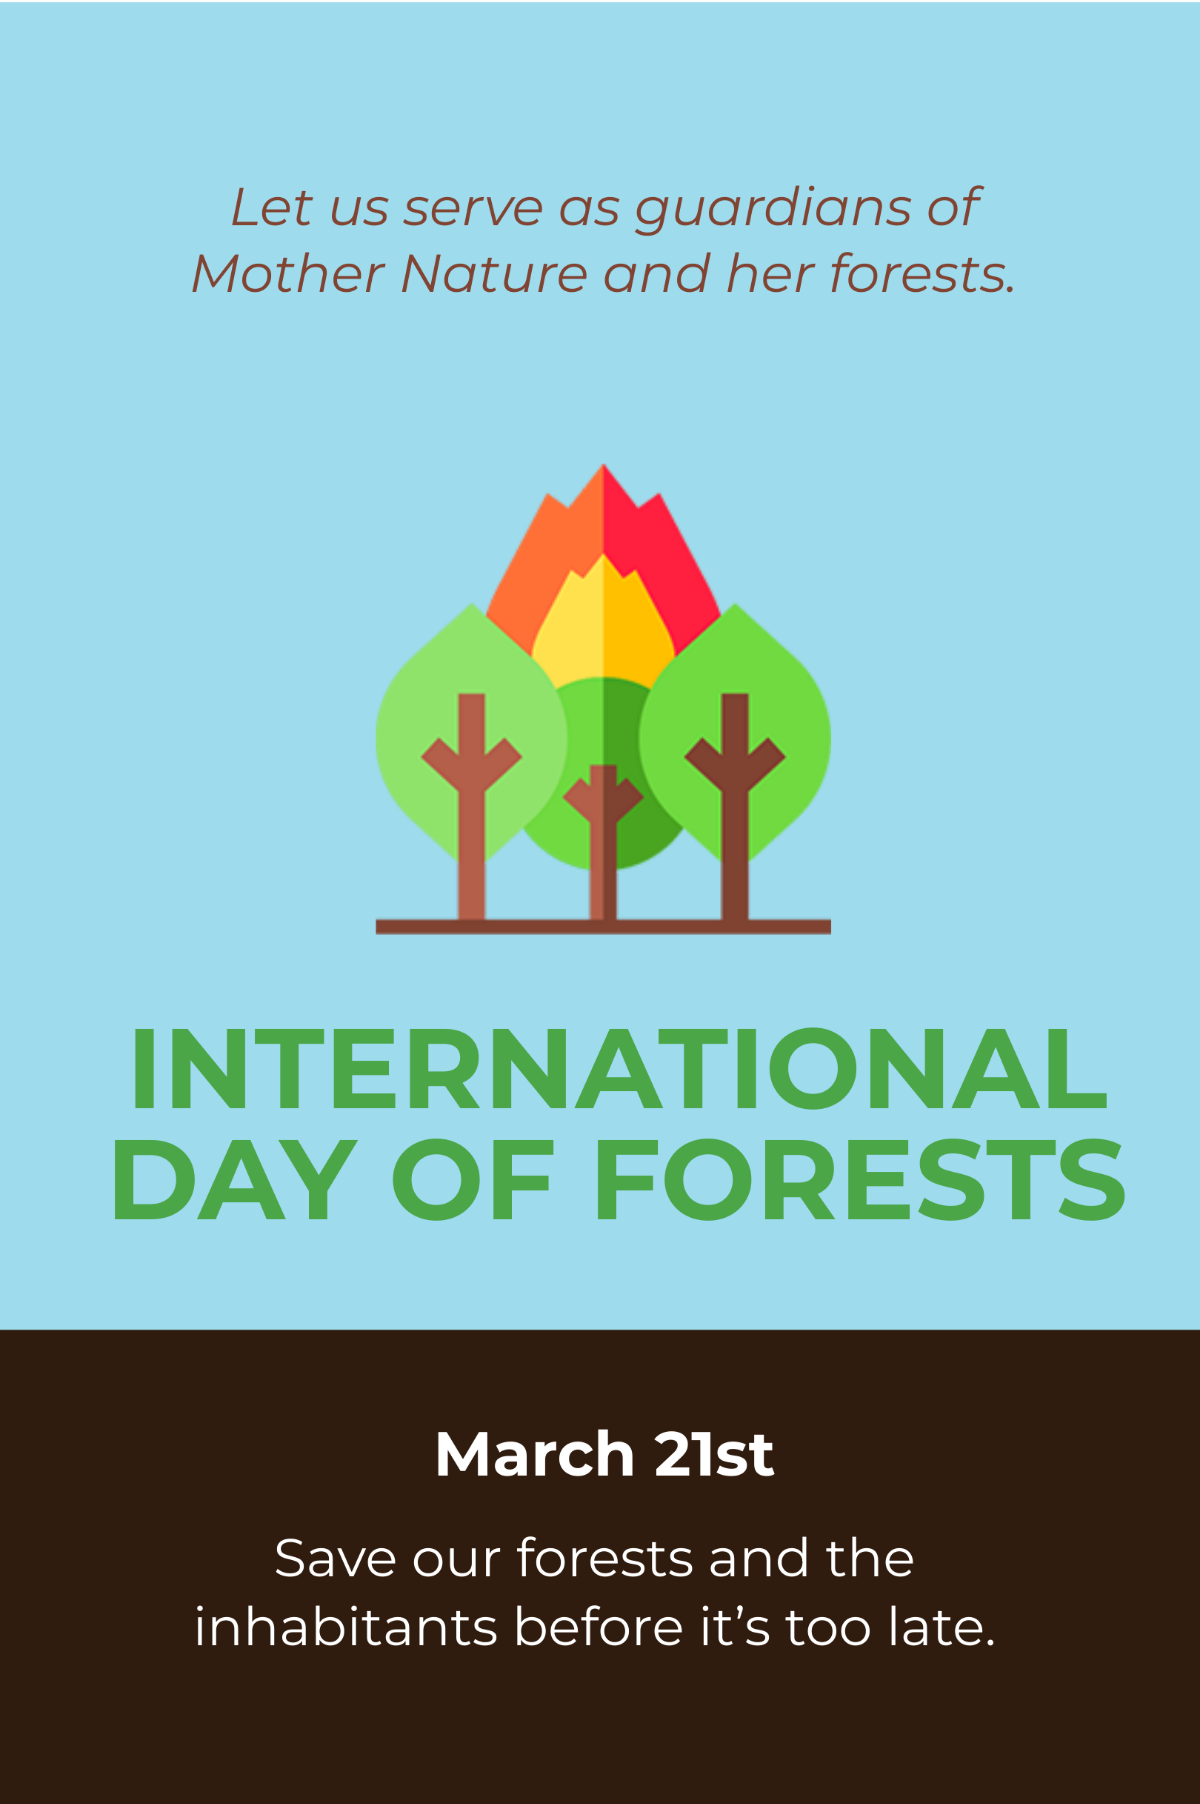 Free International Day For Forests Tumblr Post Template